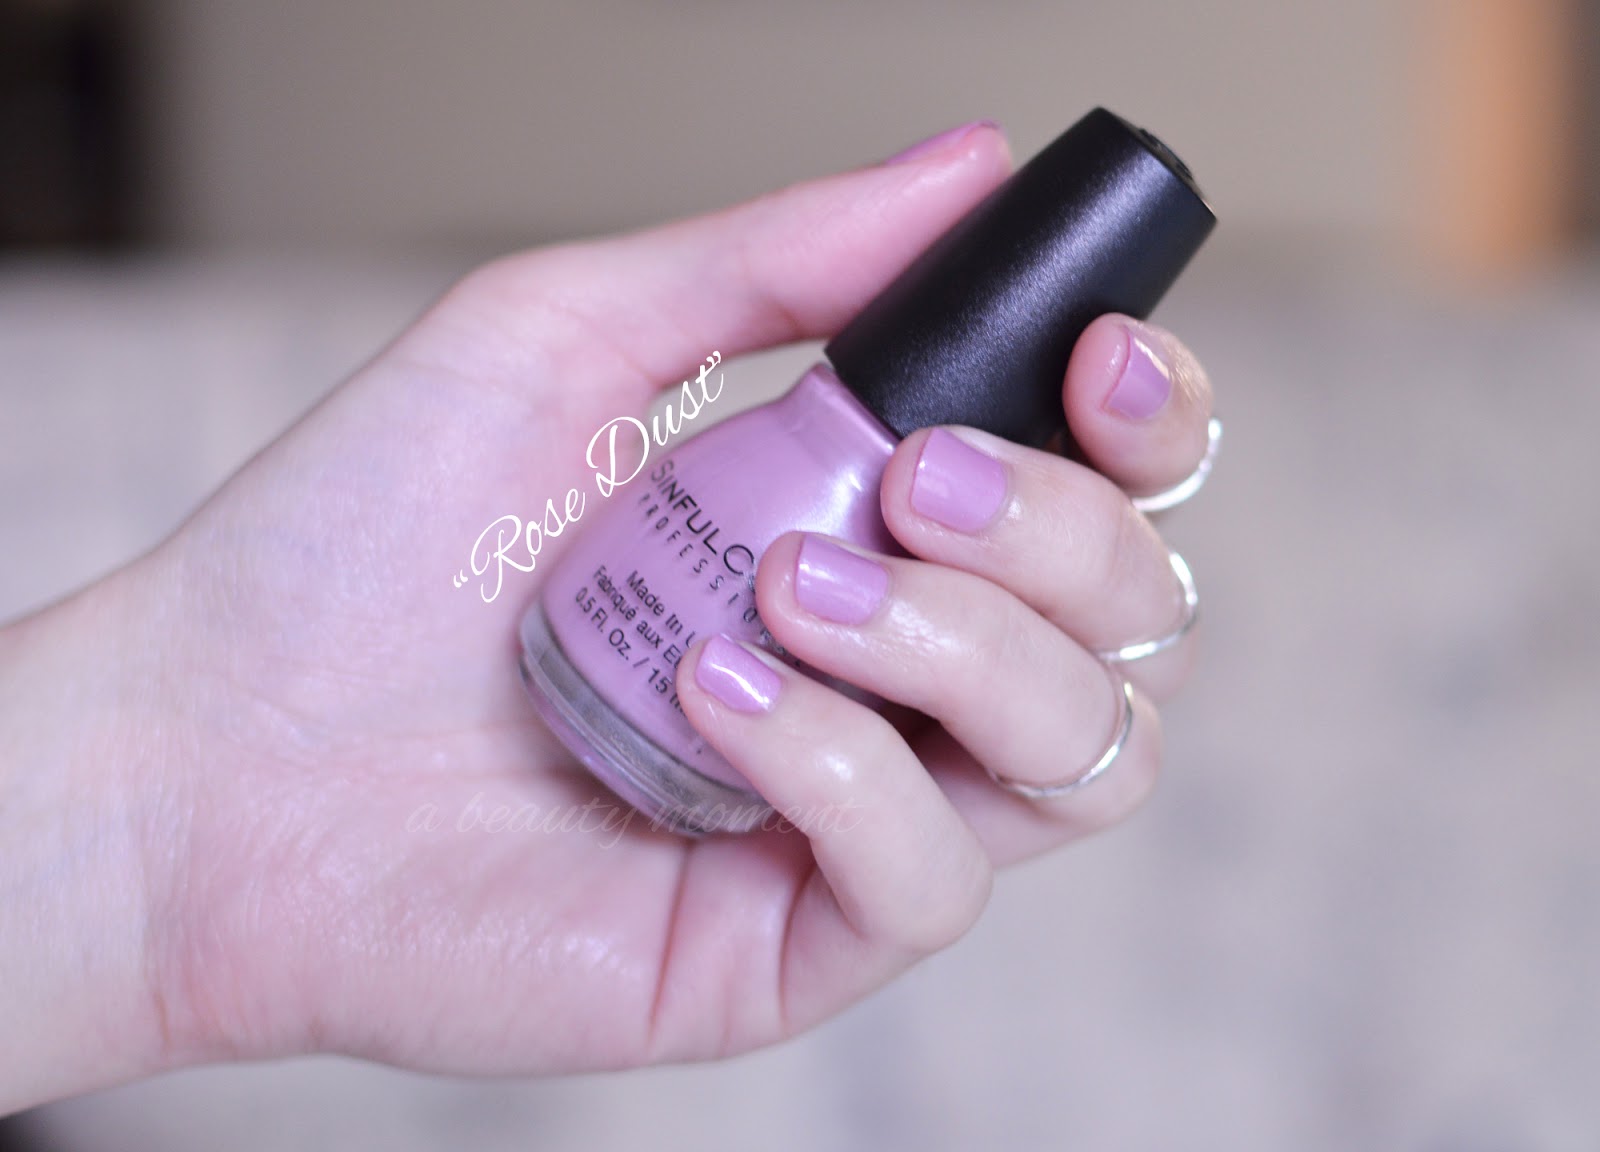 9. Sinful Colors Professional Nail Polish in "Rose Dust" - wide 8